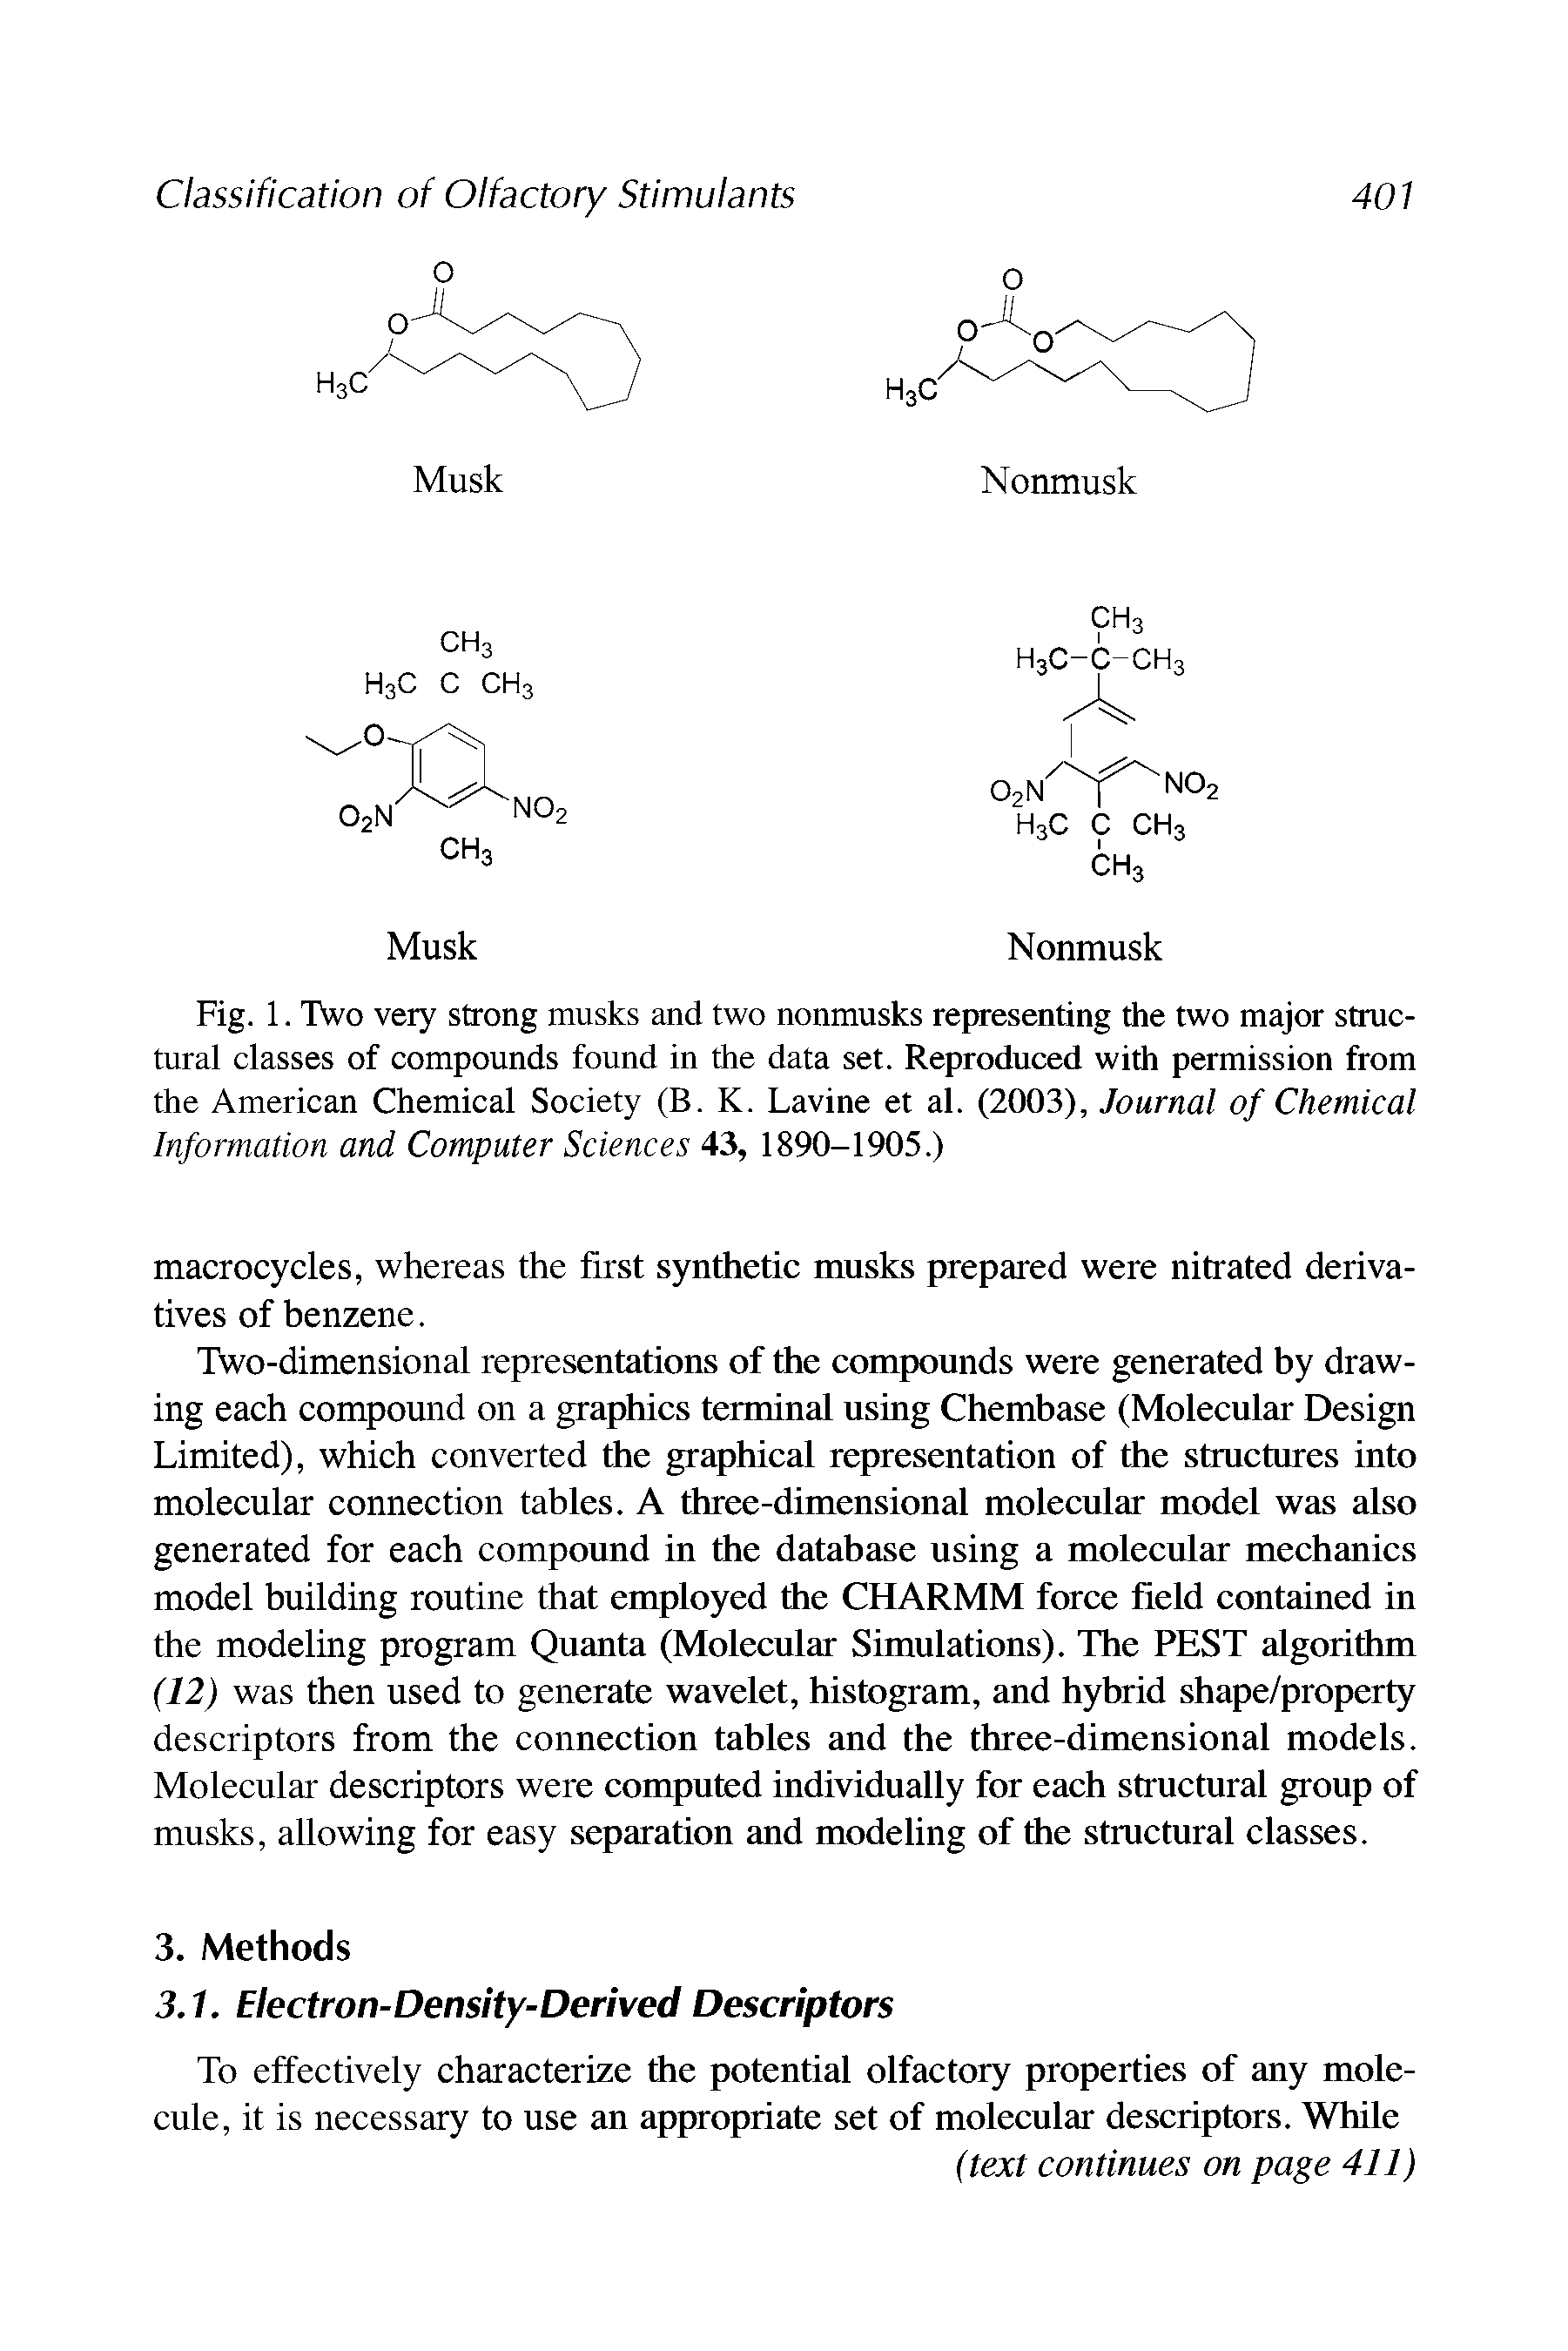 Fig. 1. Two very strong musks and two nonmusks representing the two major structural classes of compounds found in the data set. Reproduced with permission from the American Chemical Society (B. K. Lavine et al. (2003), Journal of Chemical Information and Computer Sciences 43, 1890-1905.)...